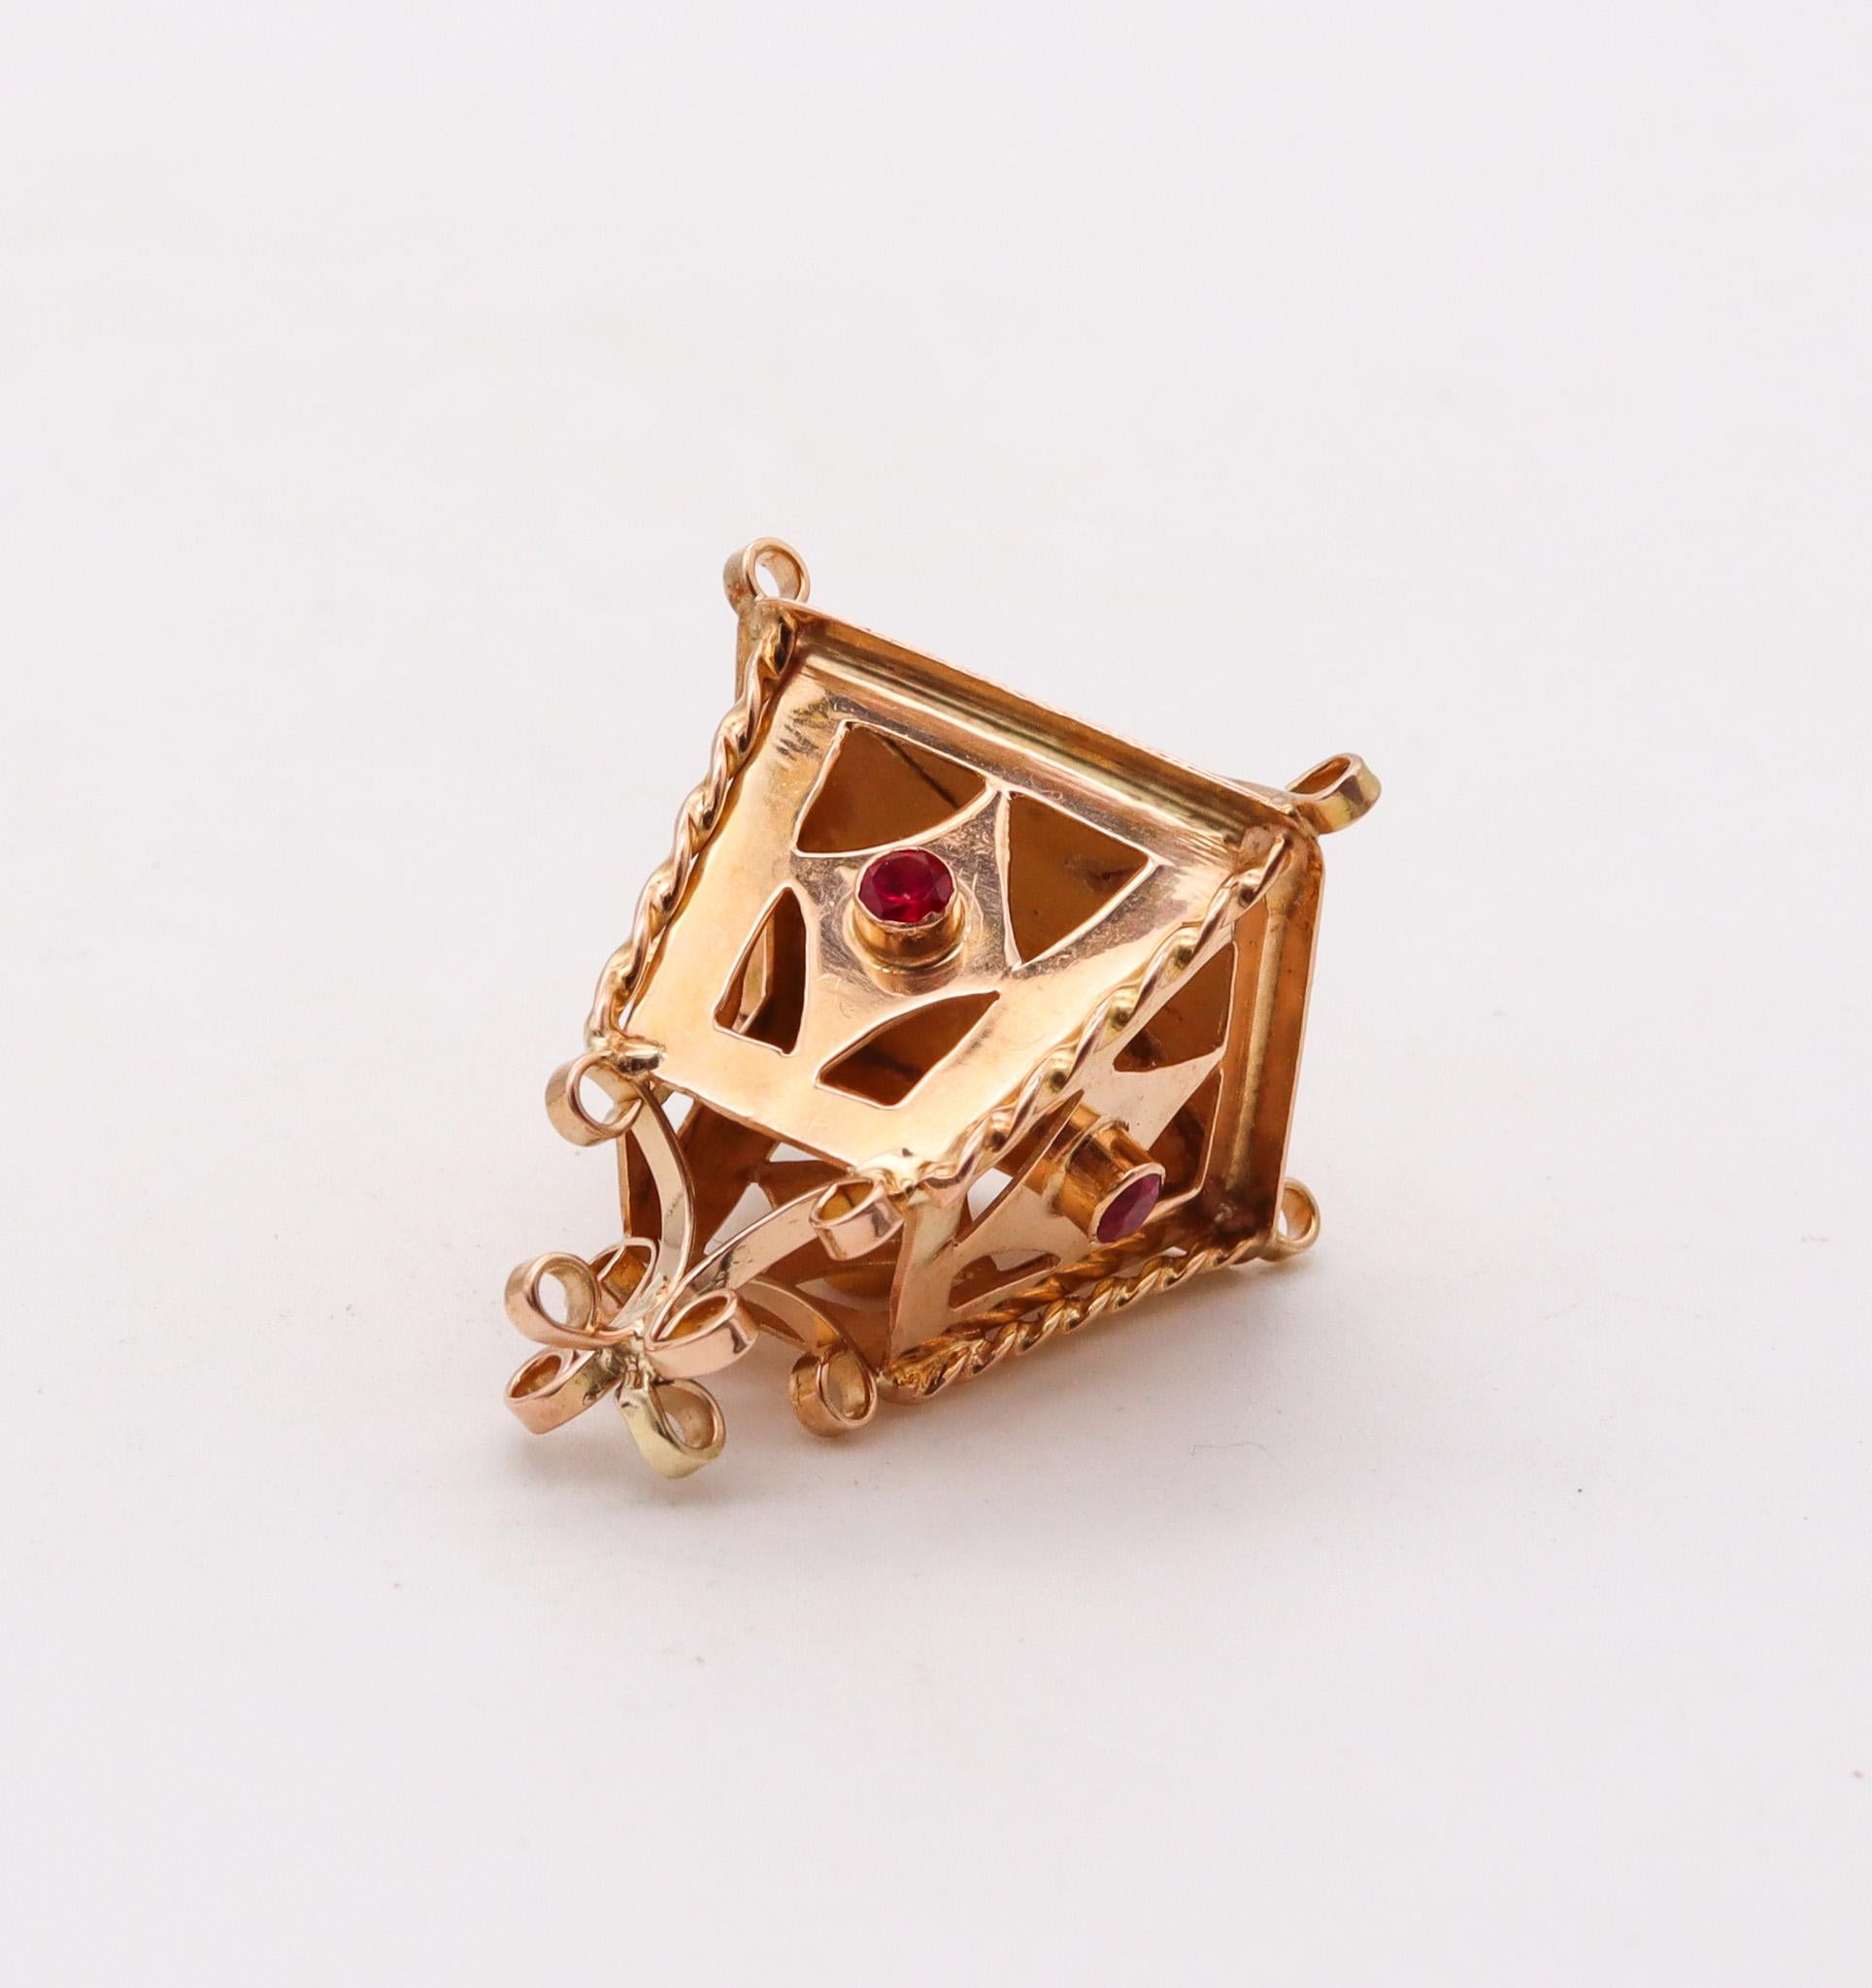 Brilliant Cut Italian 1950 Lamp Charm for Bracelet in 14 Karat Yellow Gold with Red Garnets For Sale